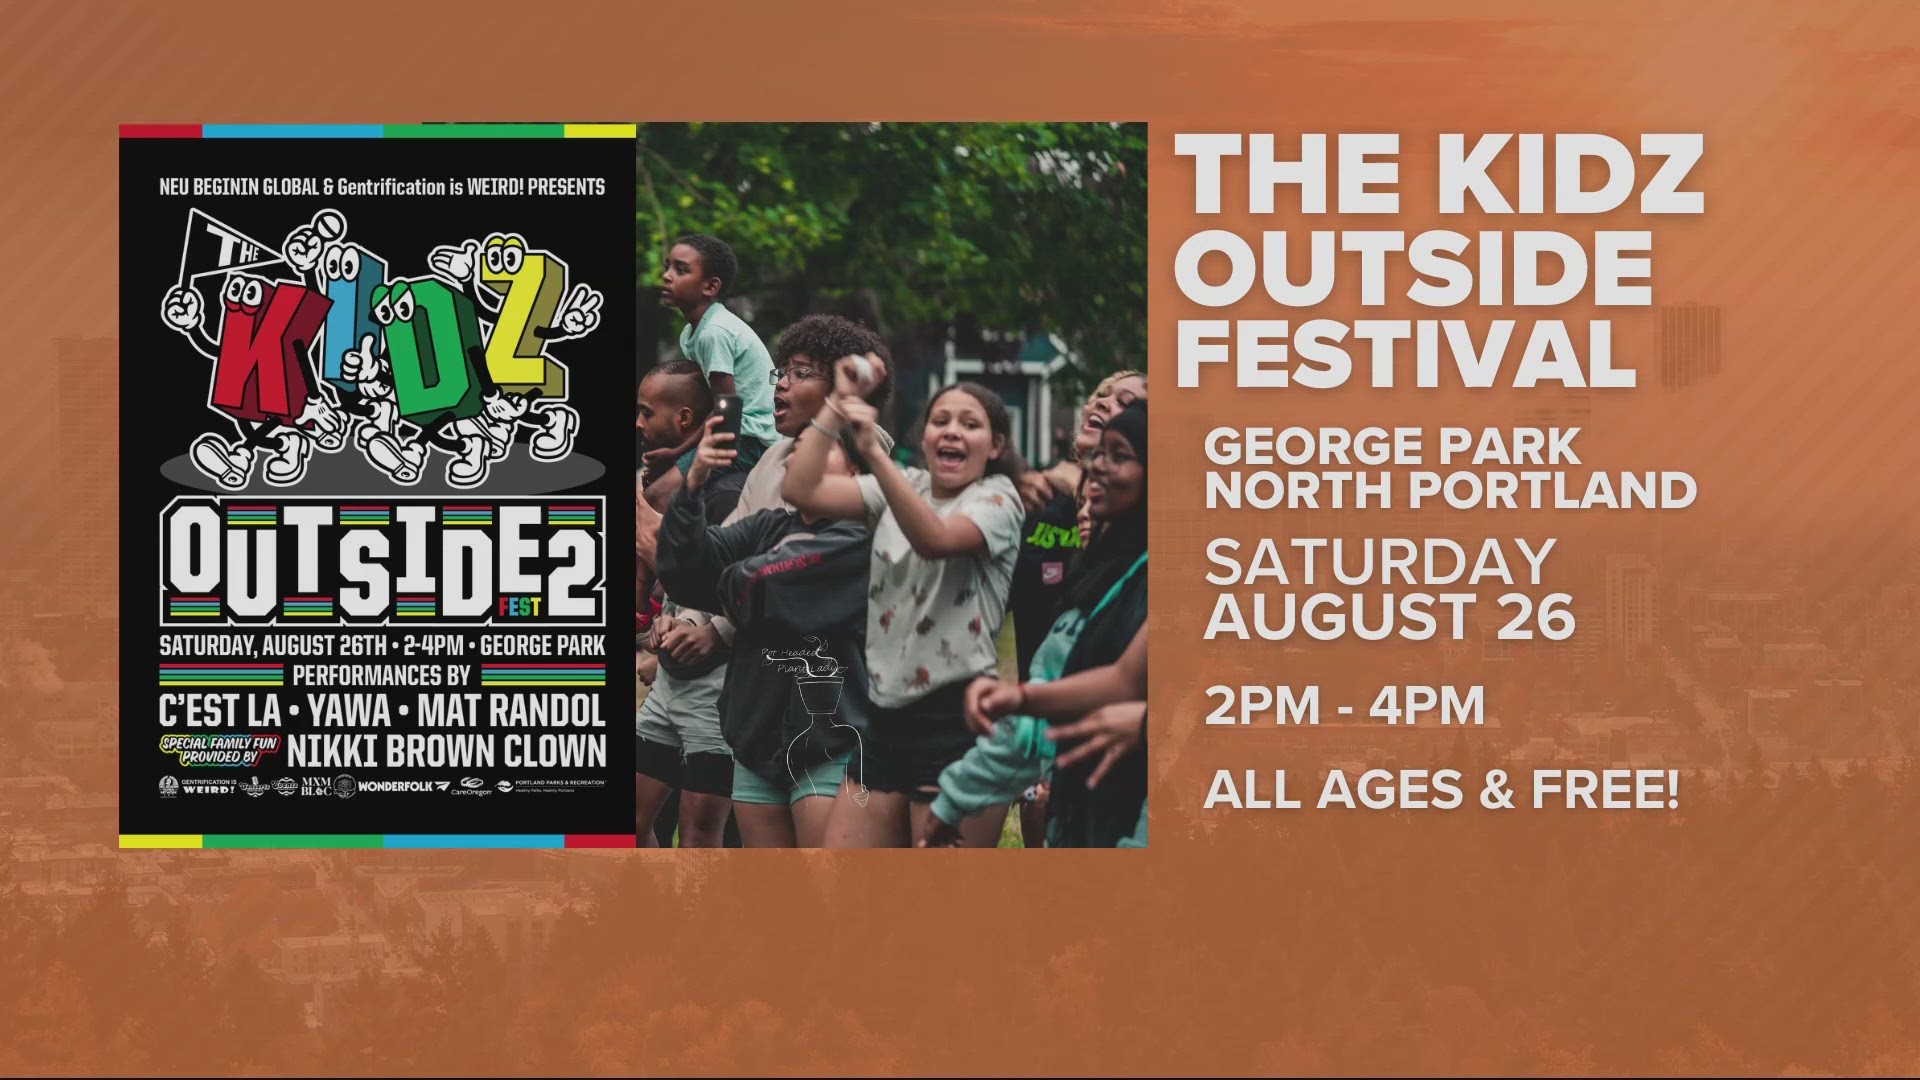 The Kidz Outside returns to George Park for a second year, bringing music, performances and fun to unite the community. There will be a backpack giveaway for youth.